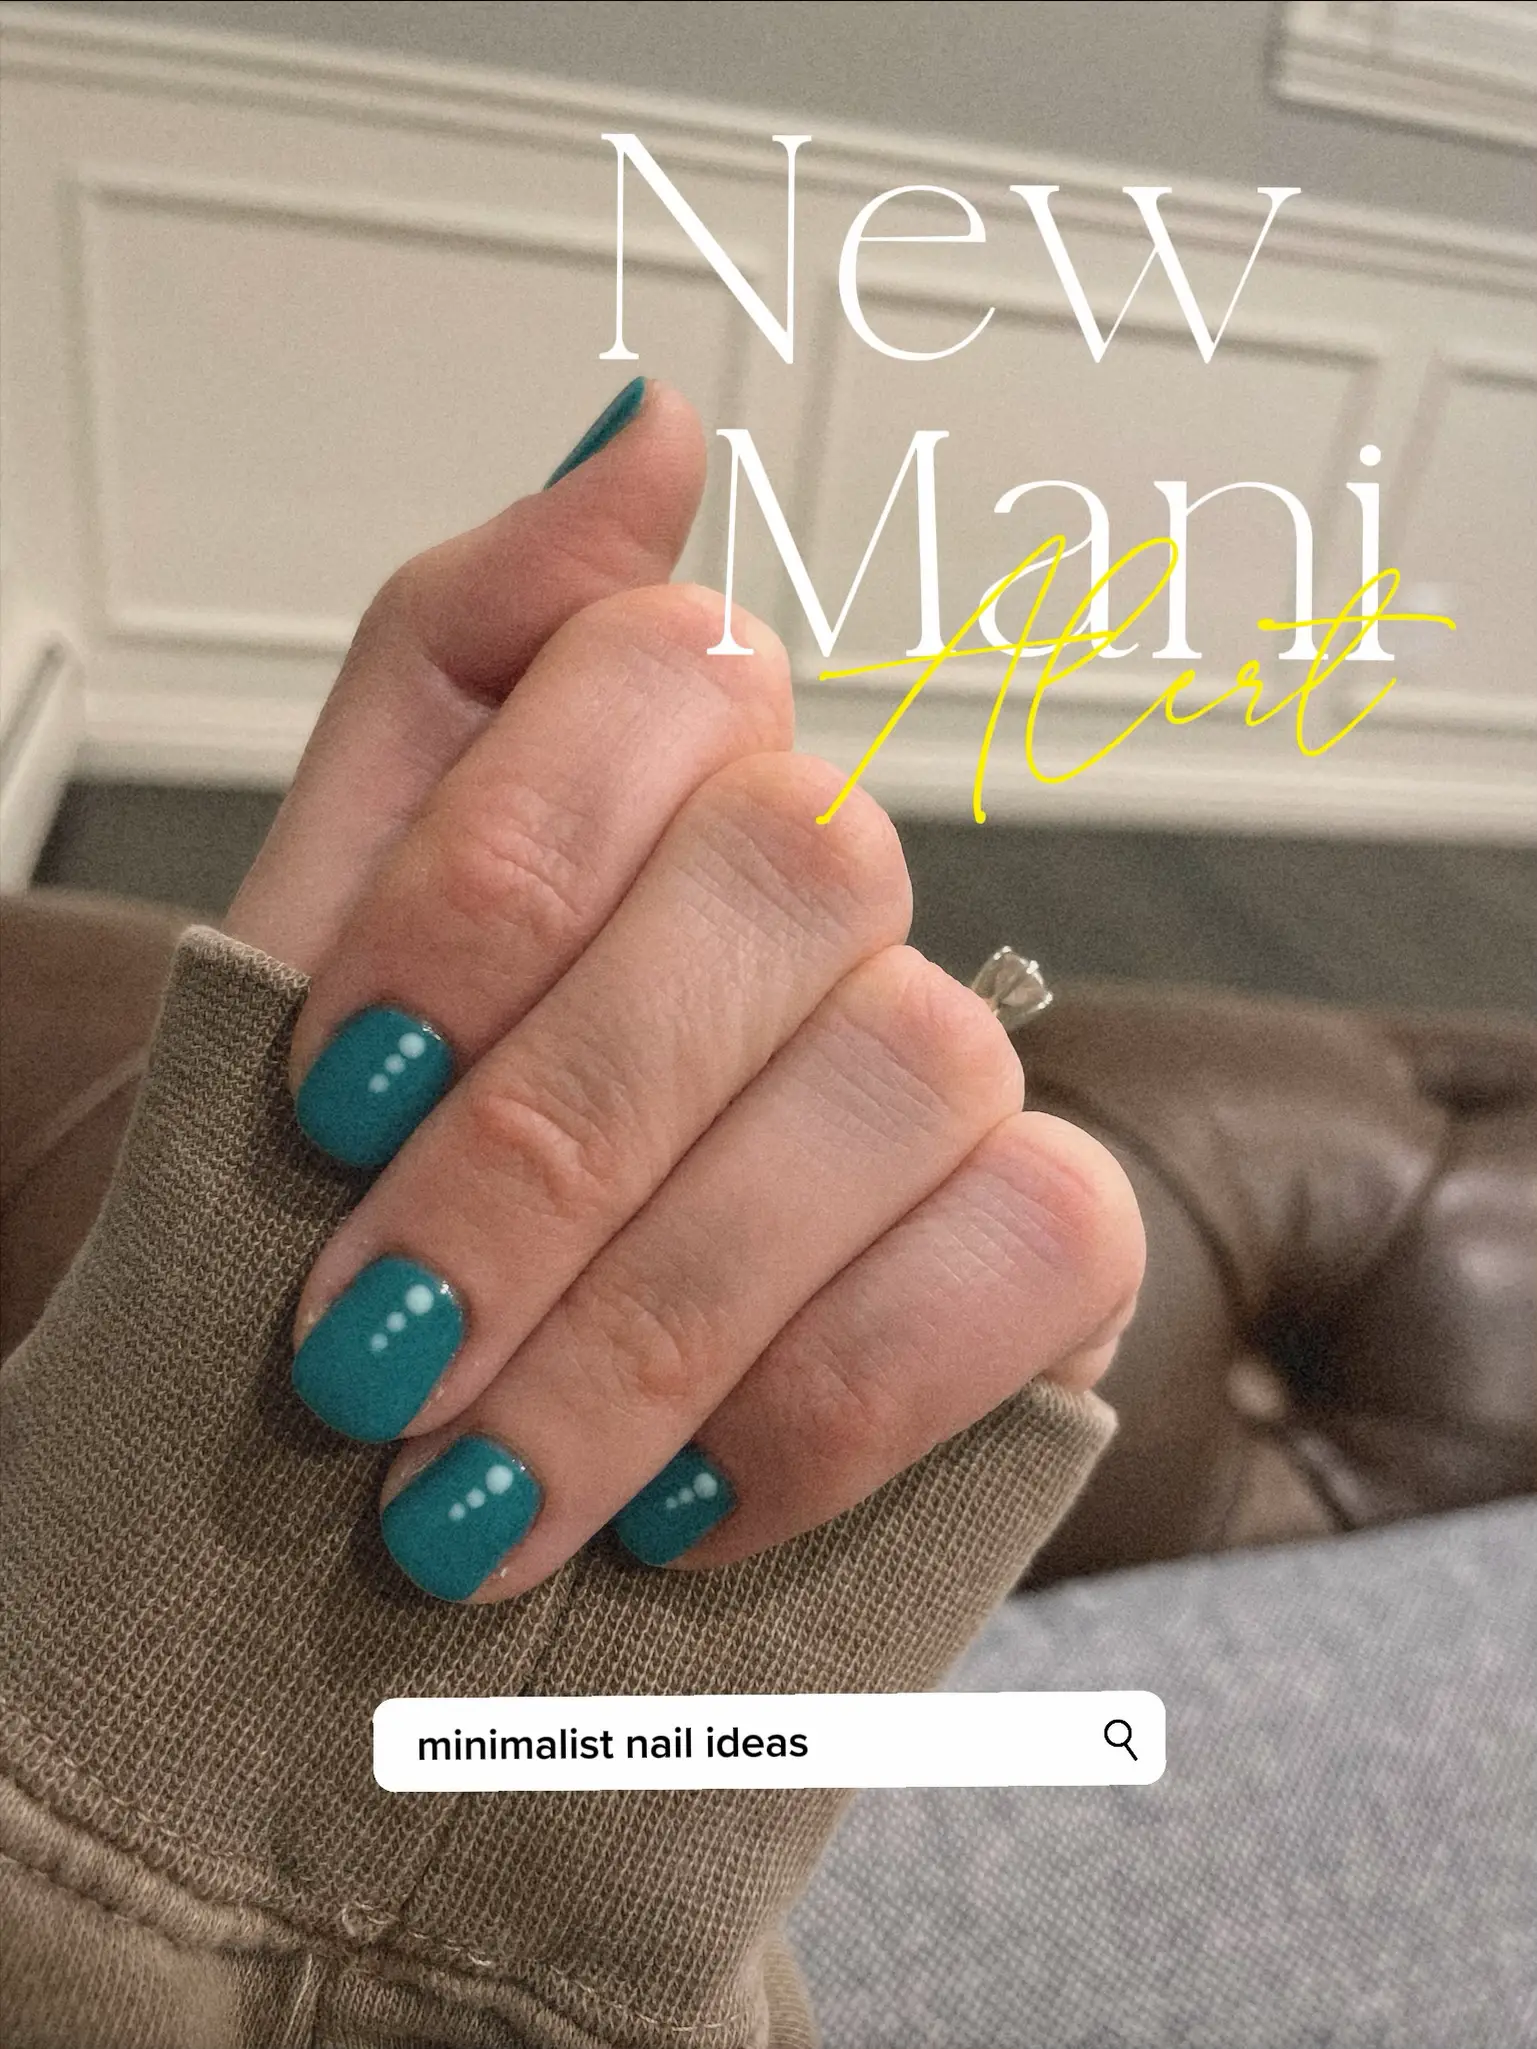 KAWS Nails: The TikTok Trend That Will Make Your Manicure Stand Out